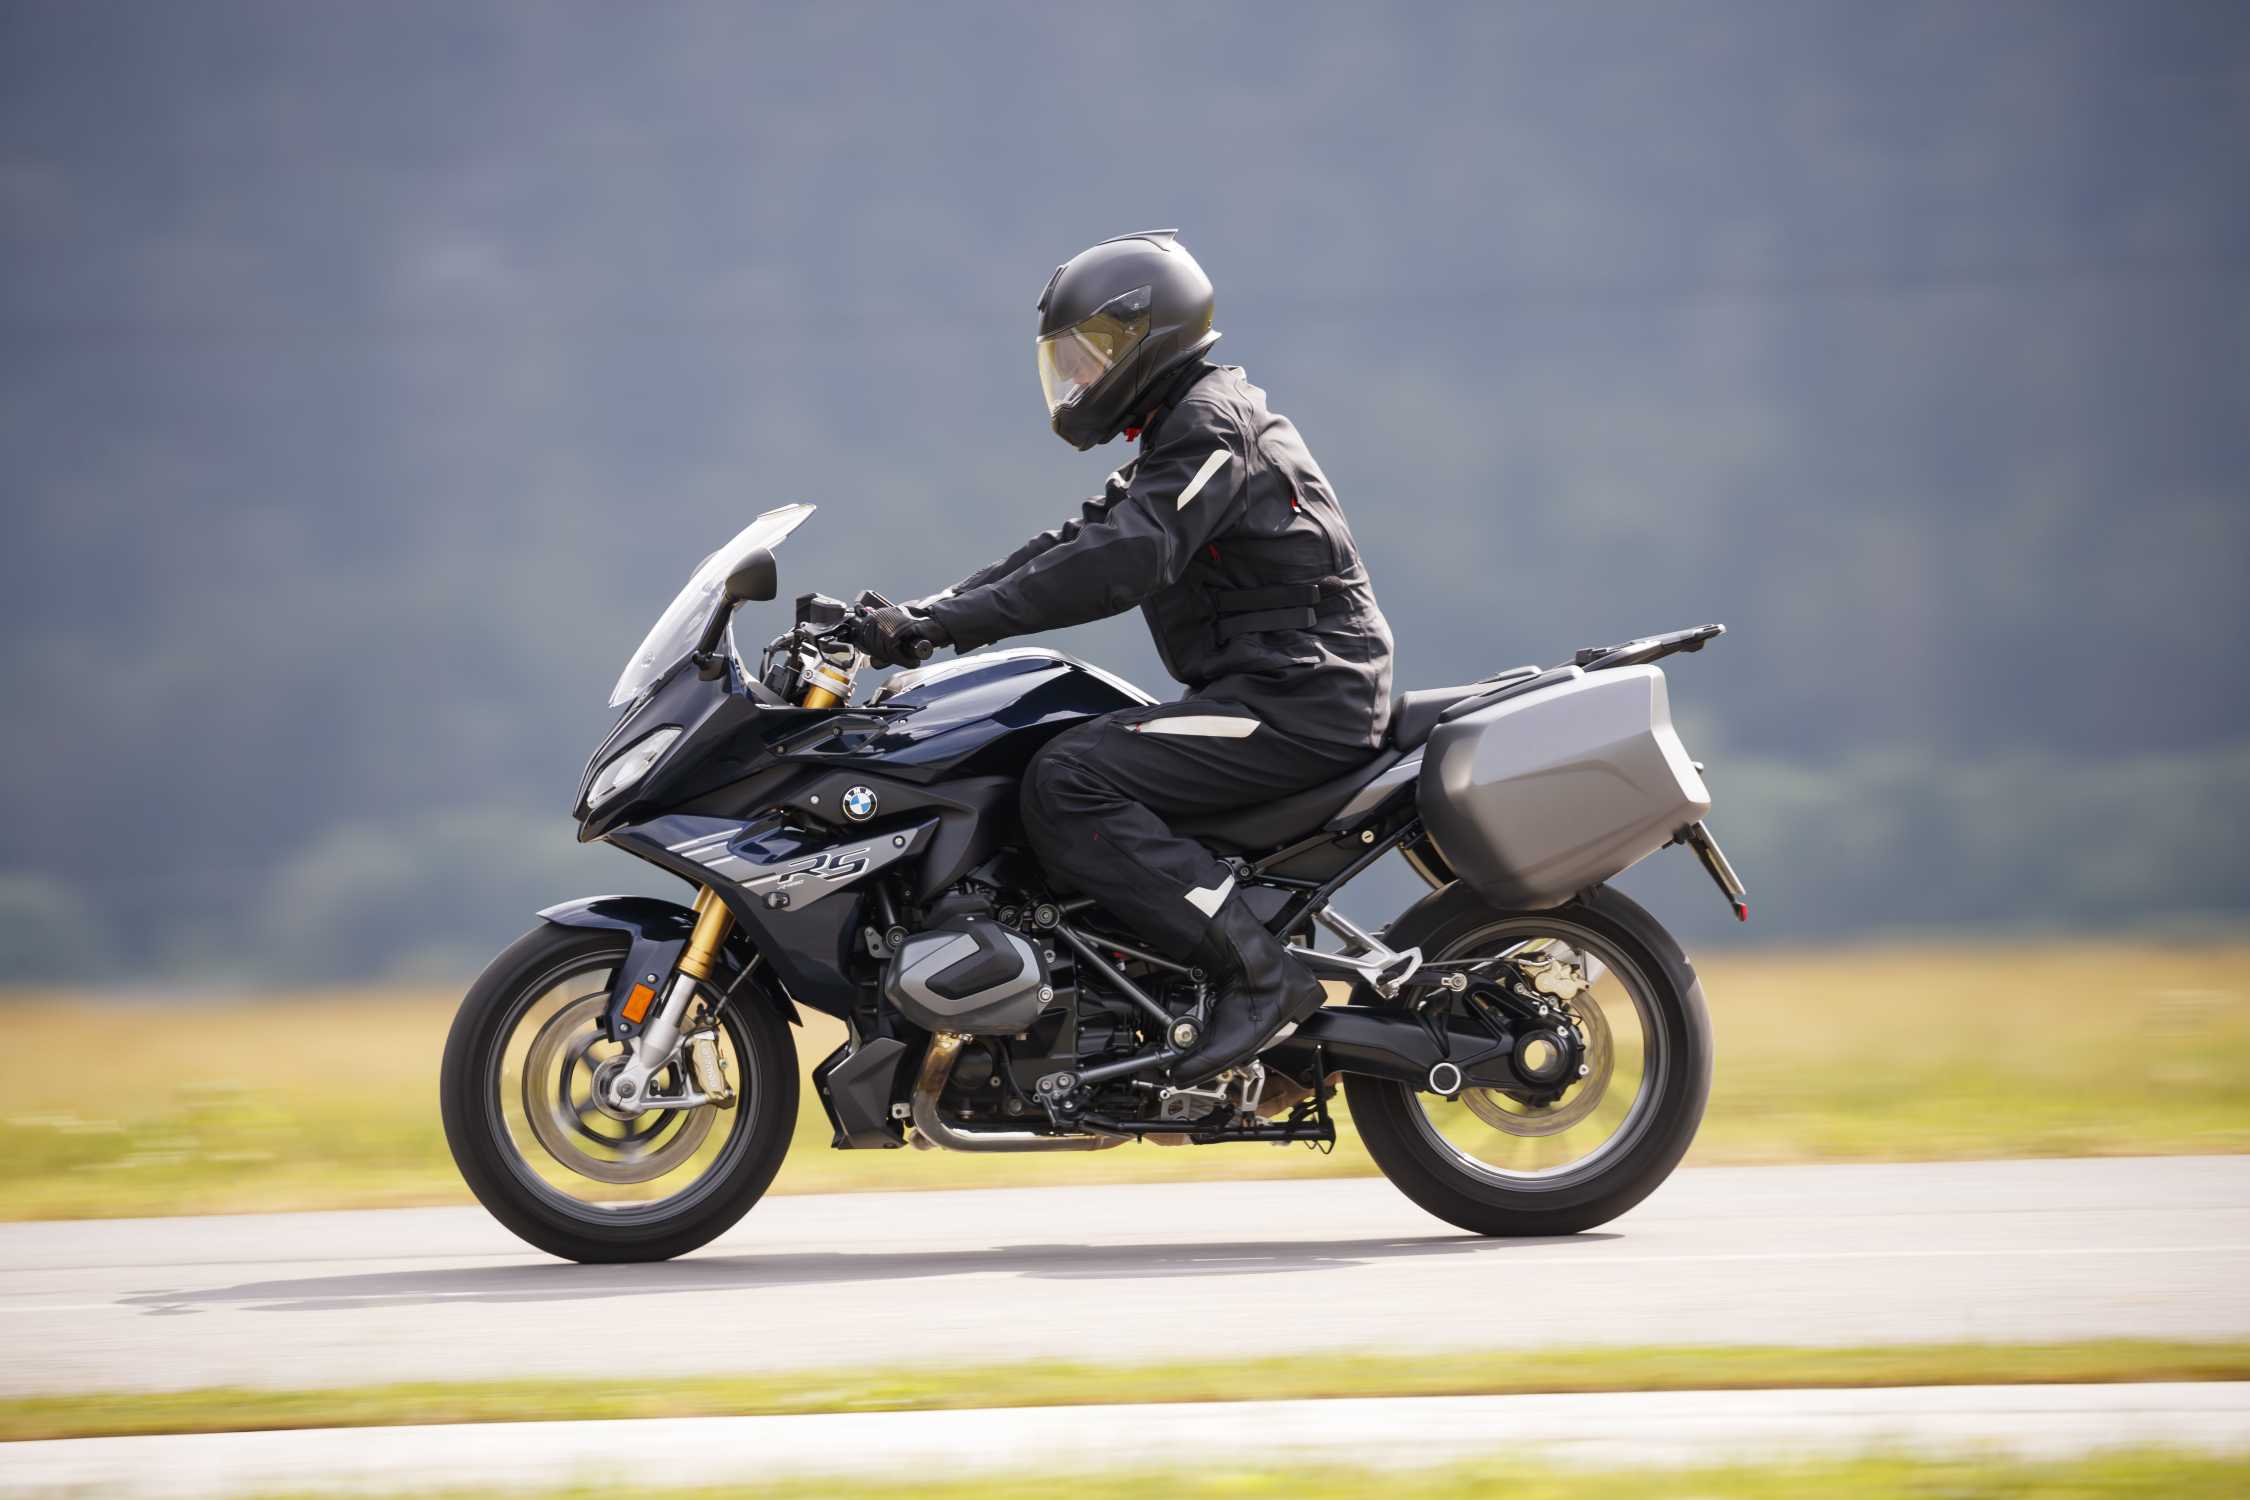 Bmw Motorrad Usa Announces Pricing Features Packages And Options For 2020 Bmw R 1250 R Rs Models